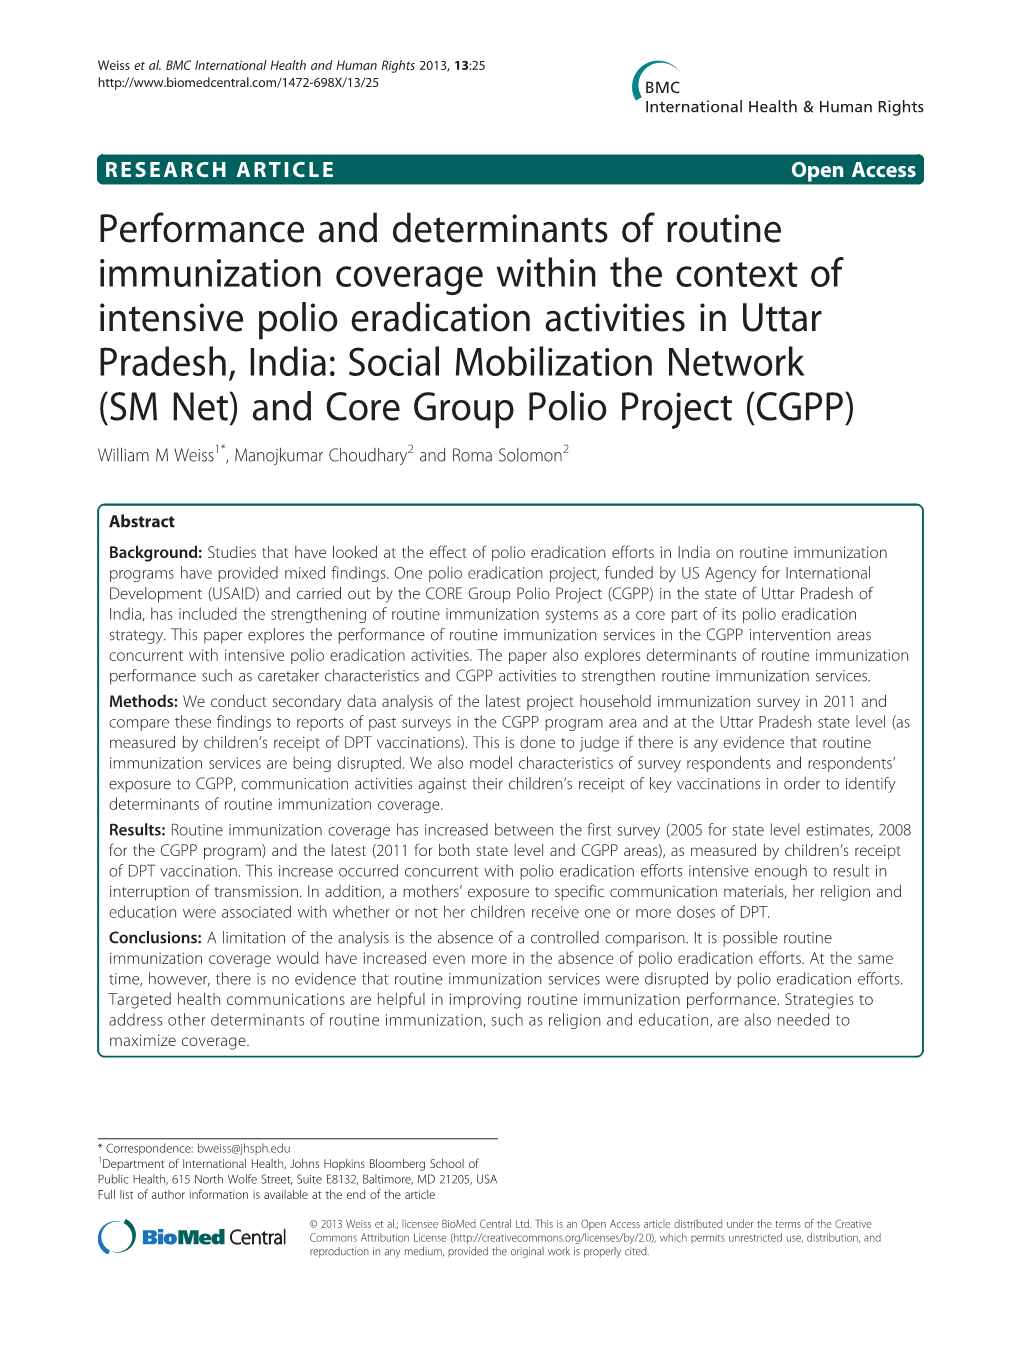 Performance and Determinants of Routine Immunization Coverage